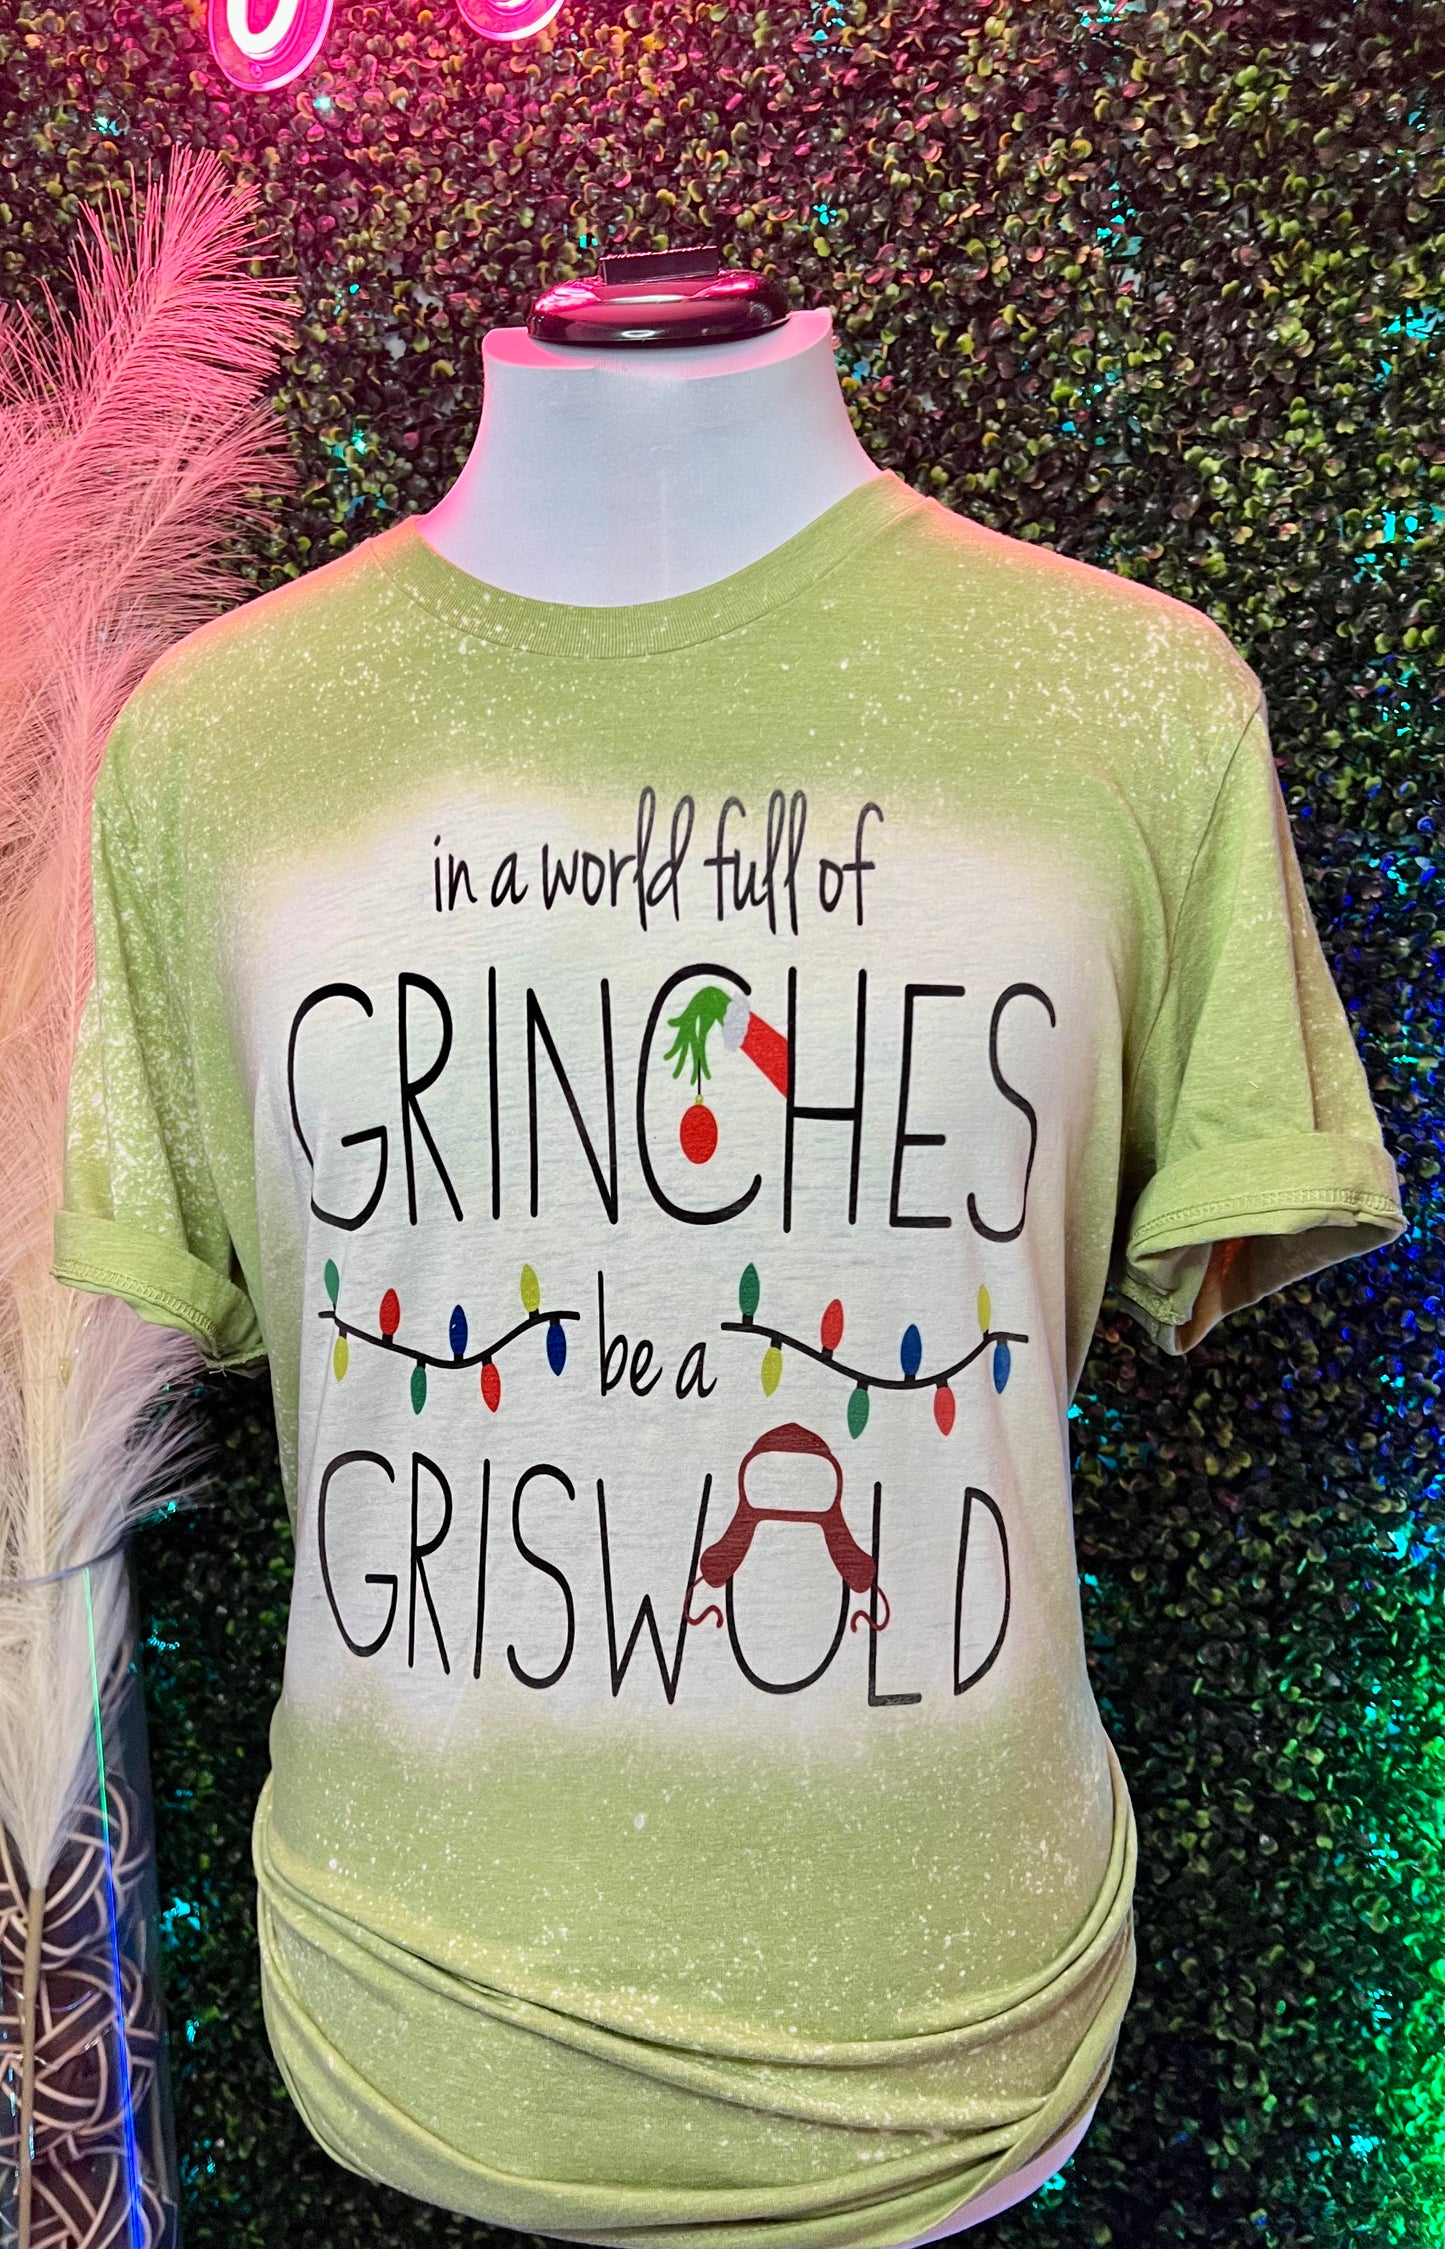 Grinches and Griswolds